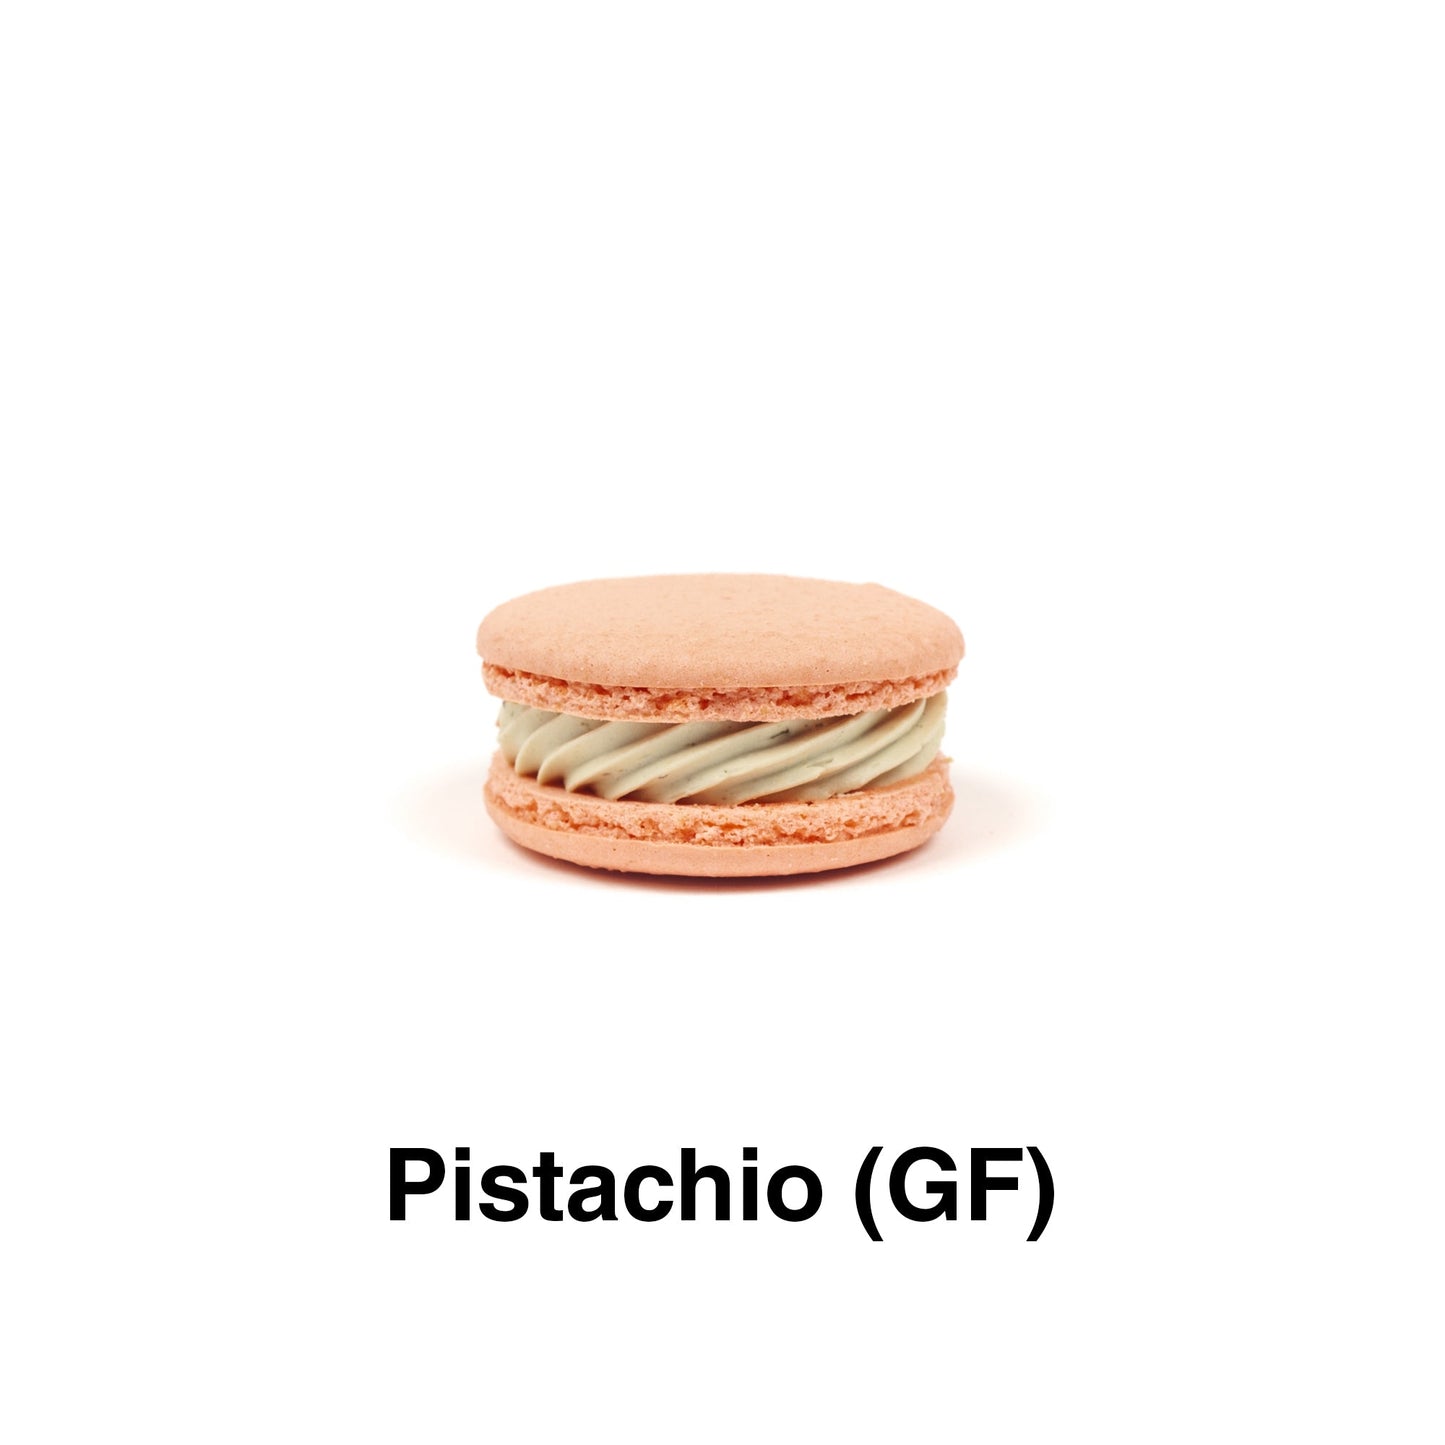 CHOOSE YOUR FAVOURITE 6-PACK MACARONS